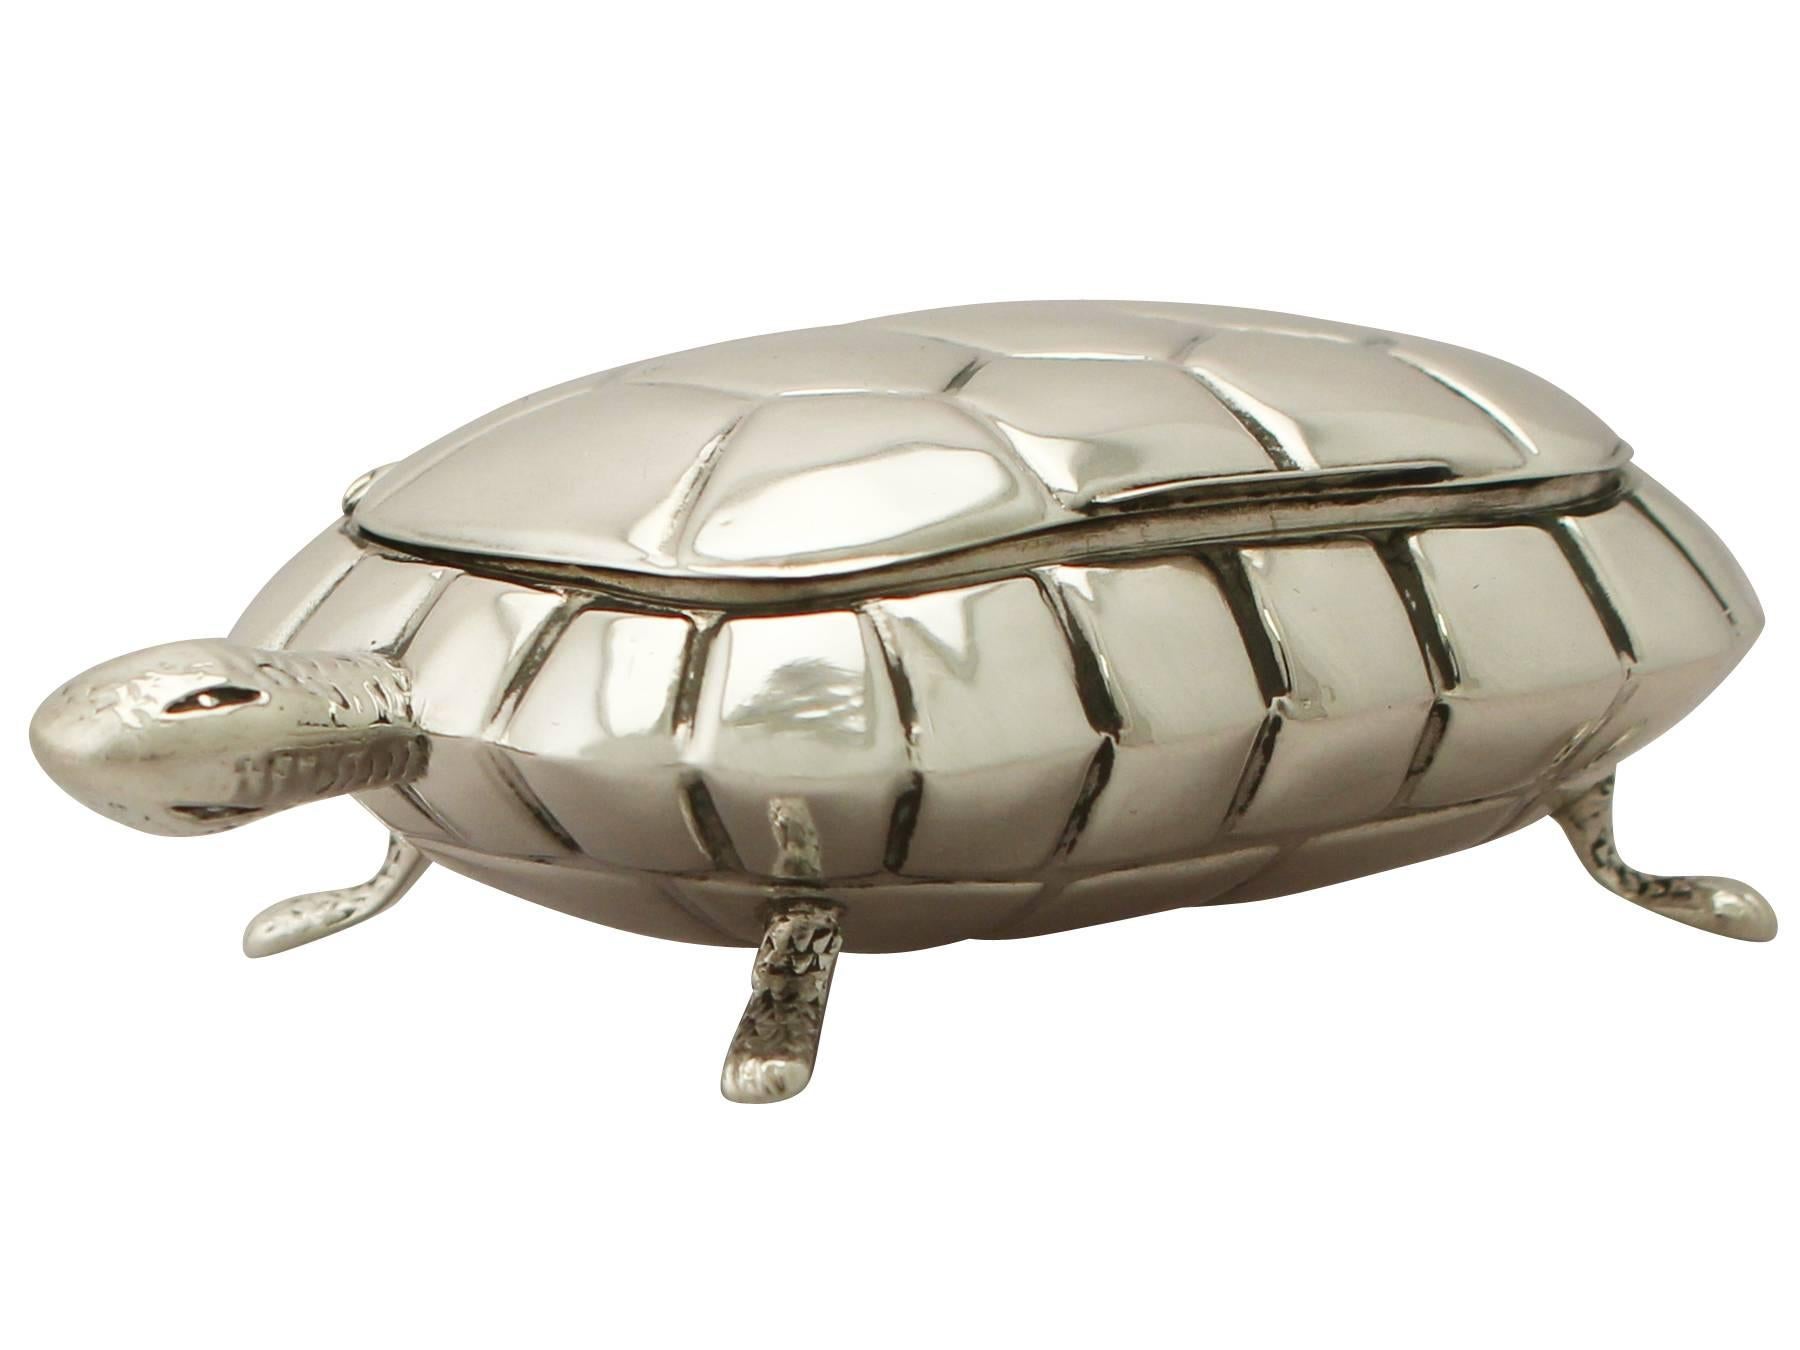 A fine and impressive, unusual antique Edwardian English sterling silver compact/trinket box modeled in the form of a tortoise; an addition to our ornamental silverware collection.

This fine antique Edwardian sterling silver compact/trinket box